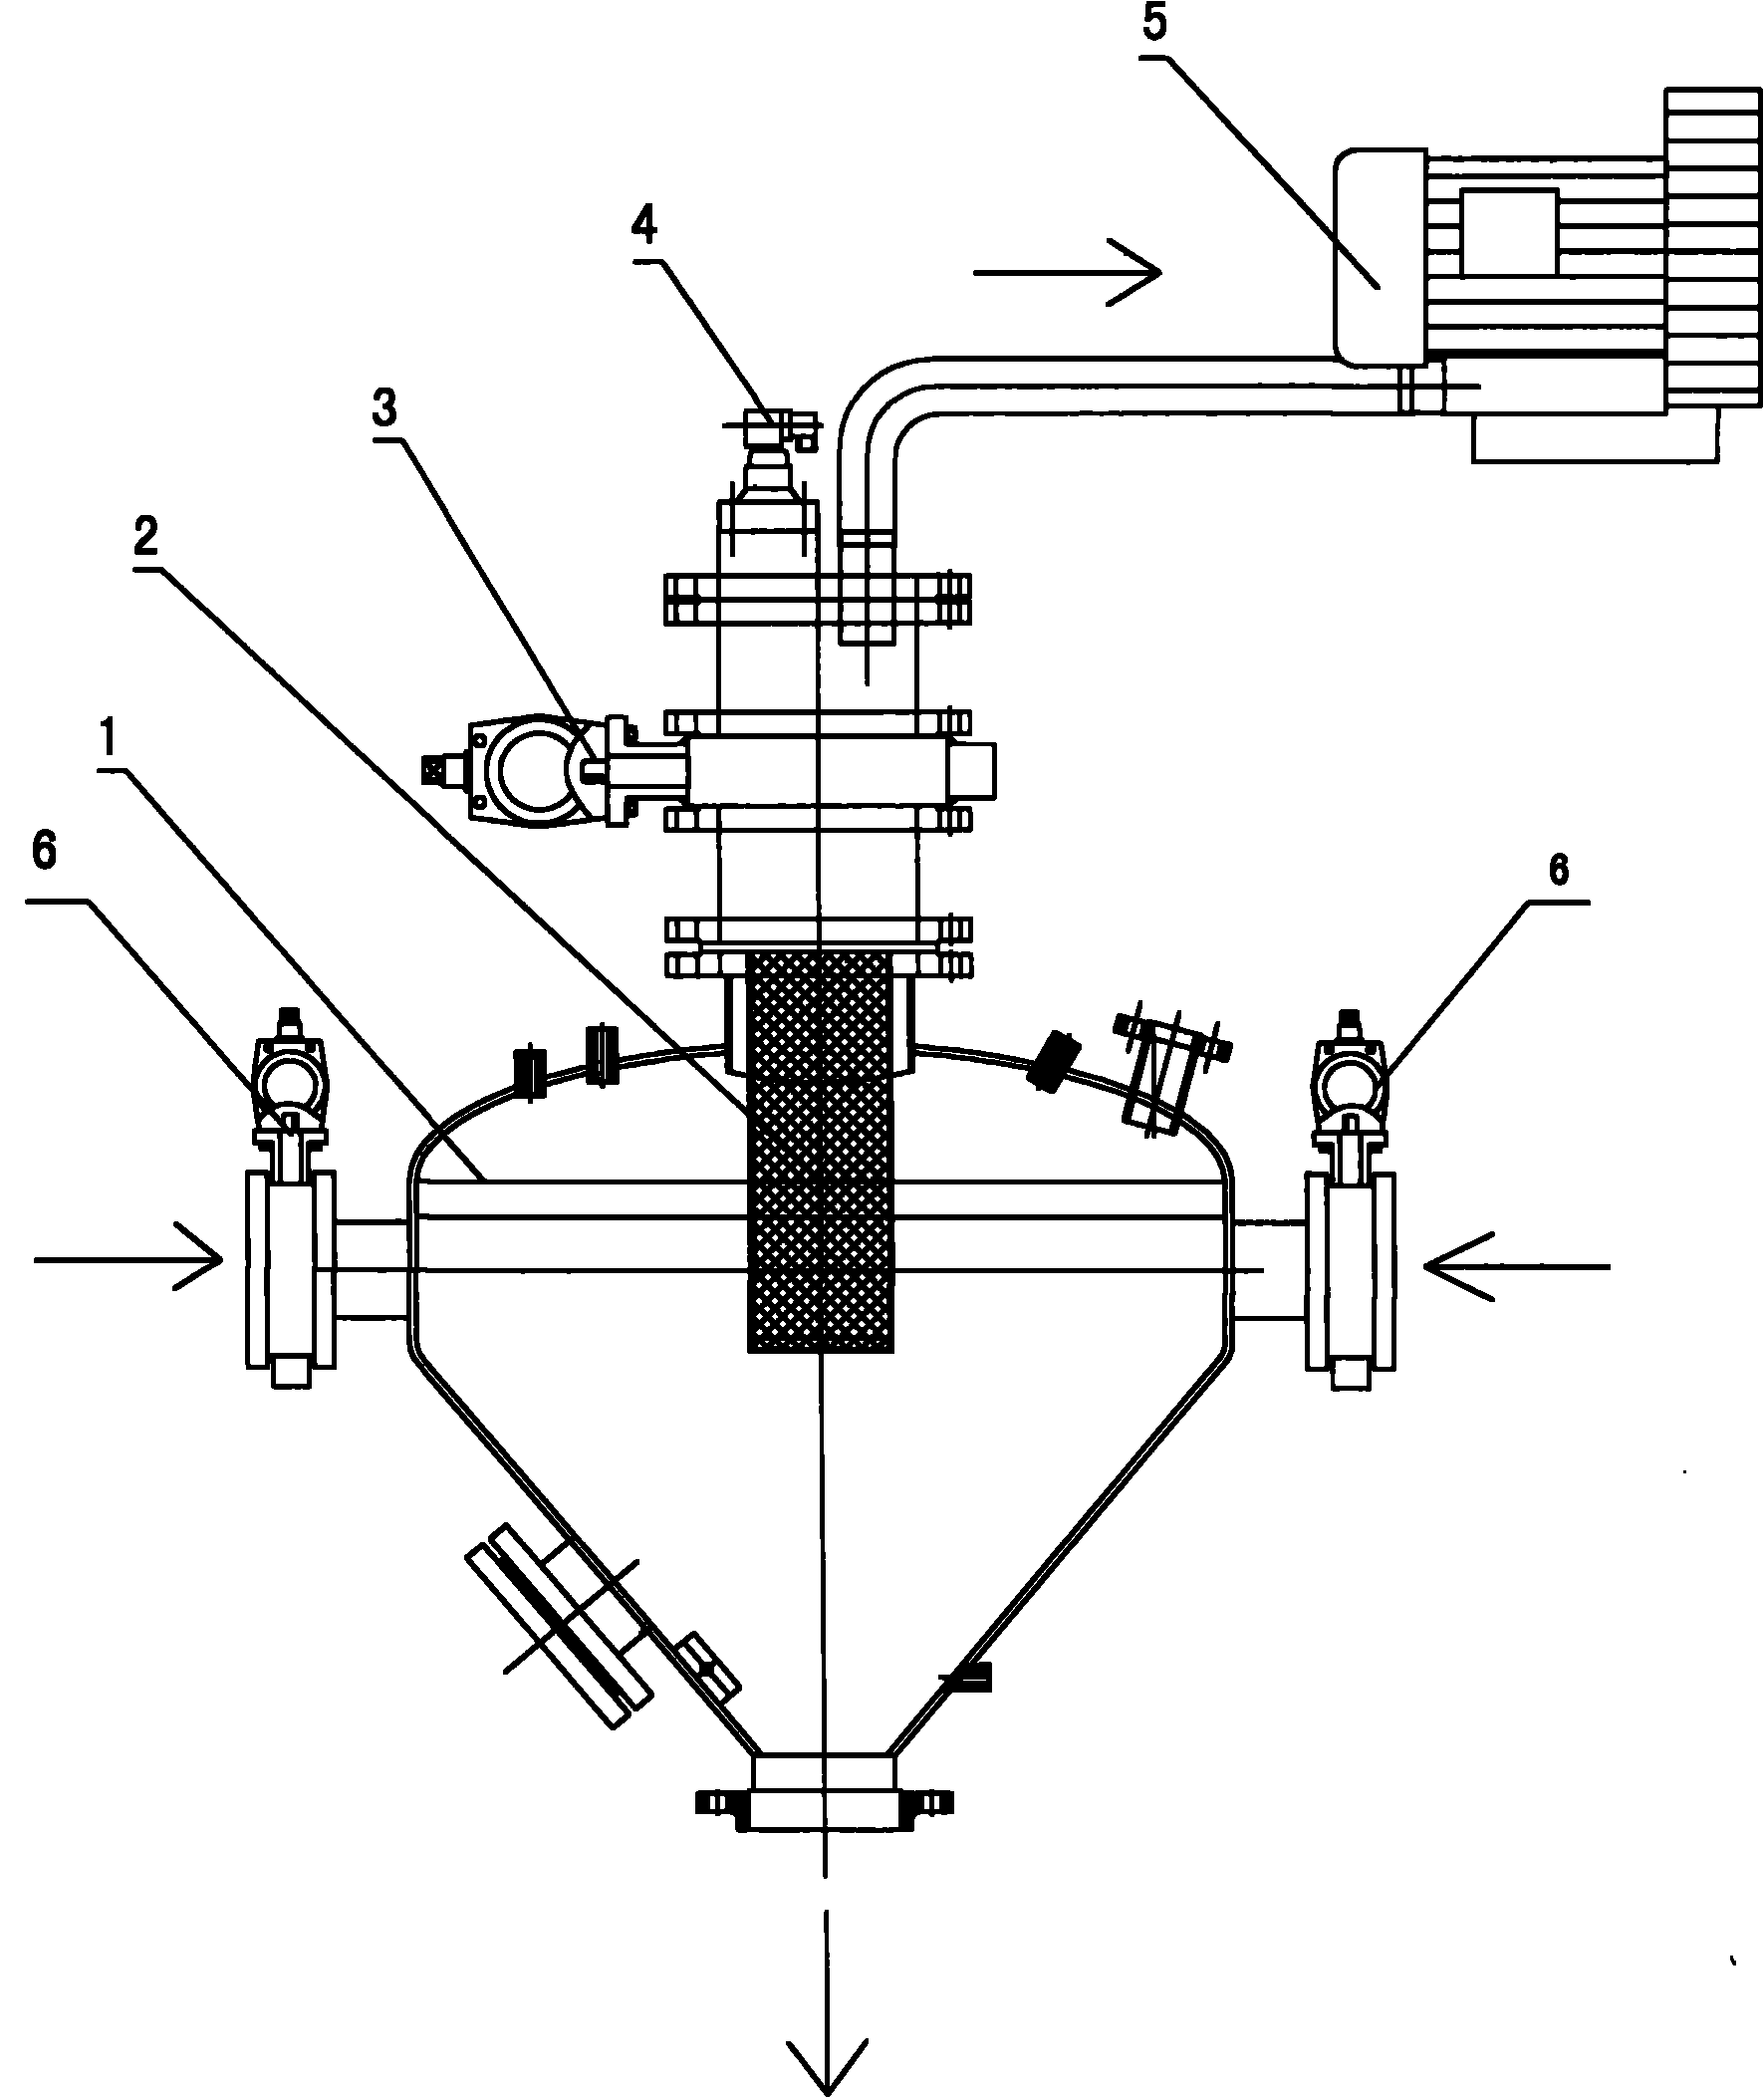 Positive and negative pressure combined delivery tank